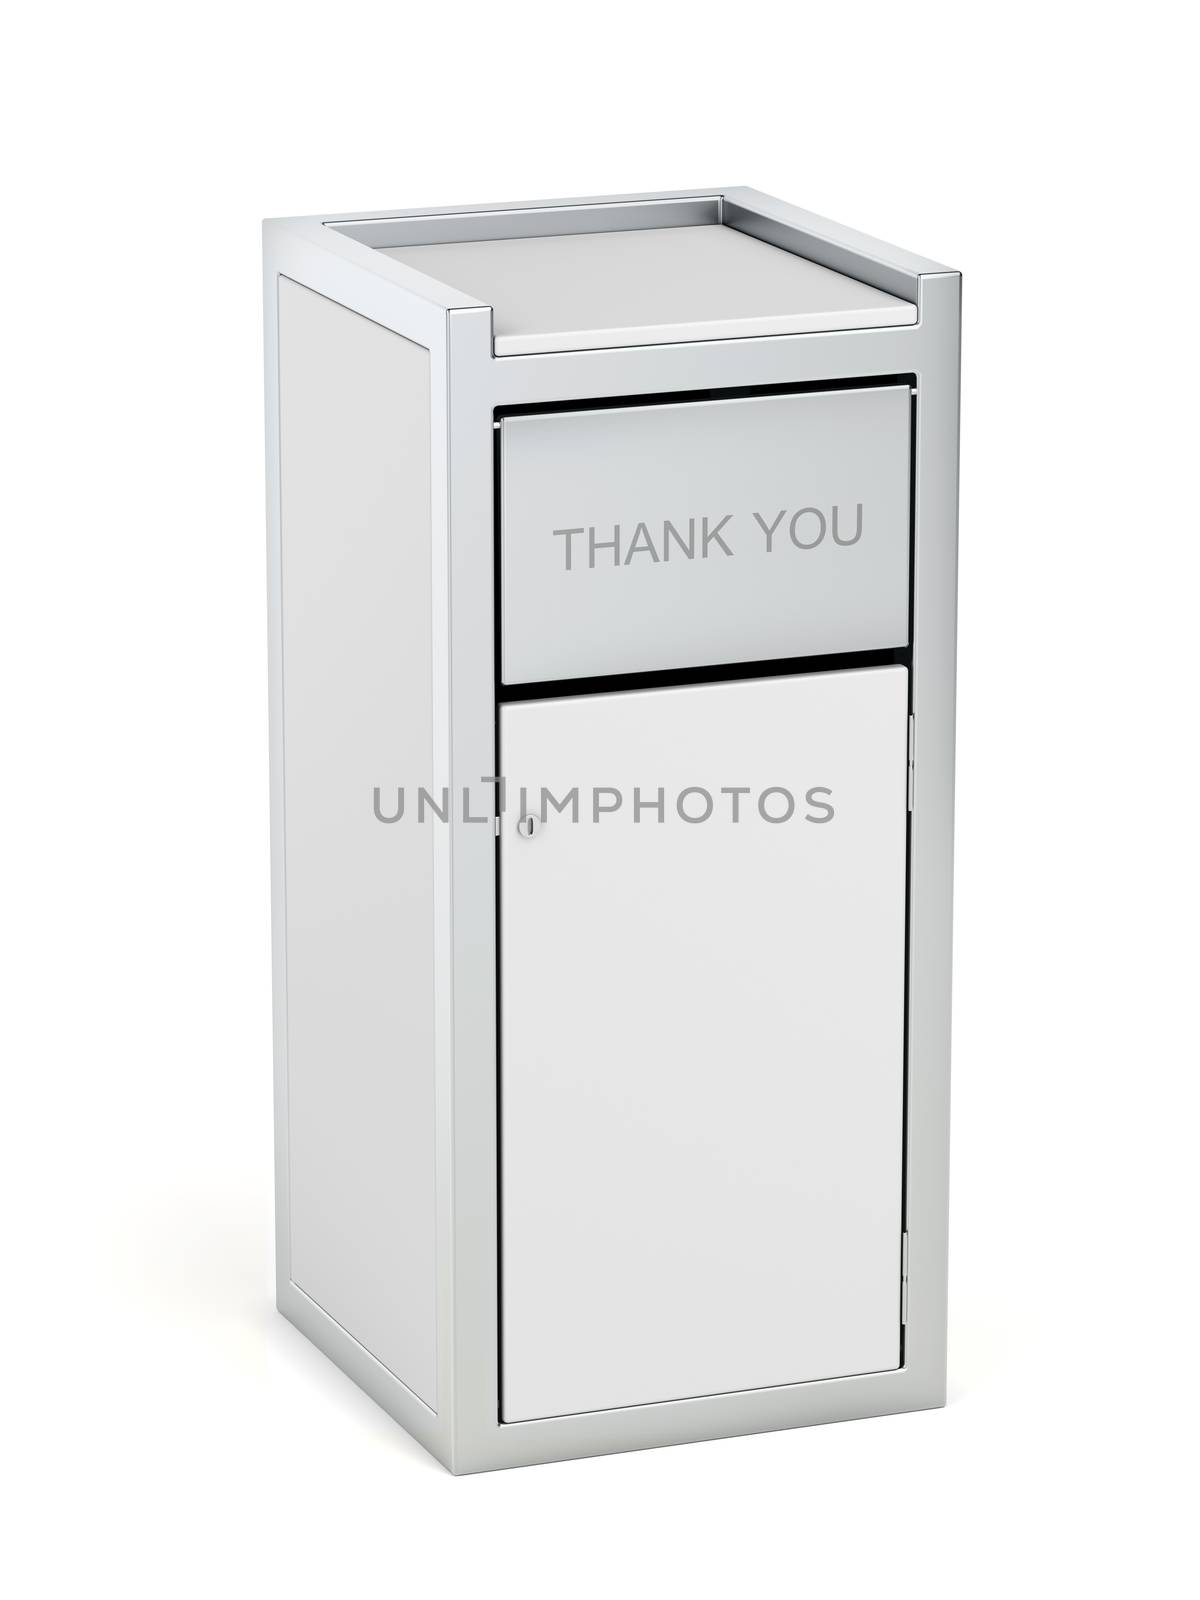 Waste container on white background by magraphics